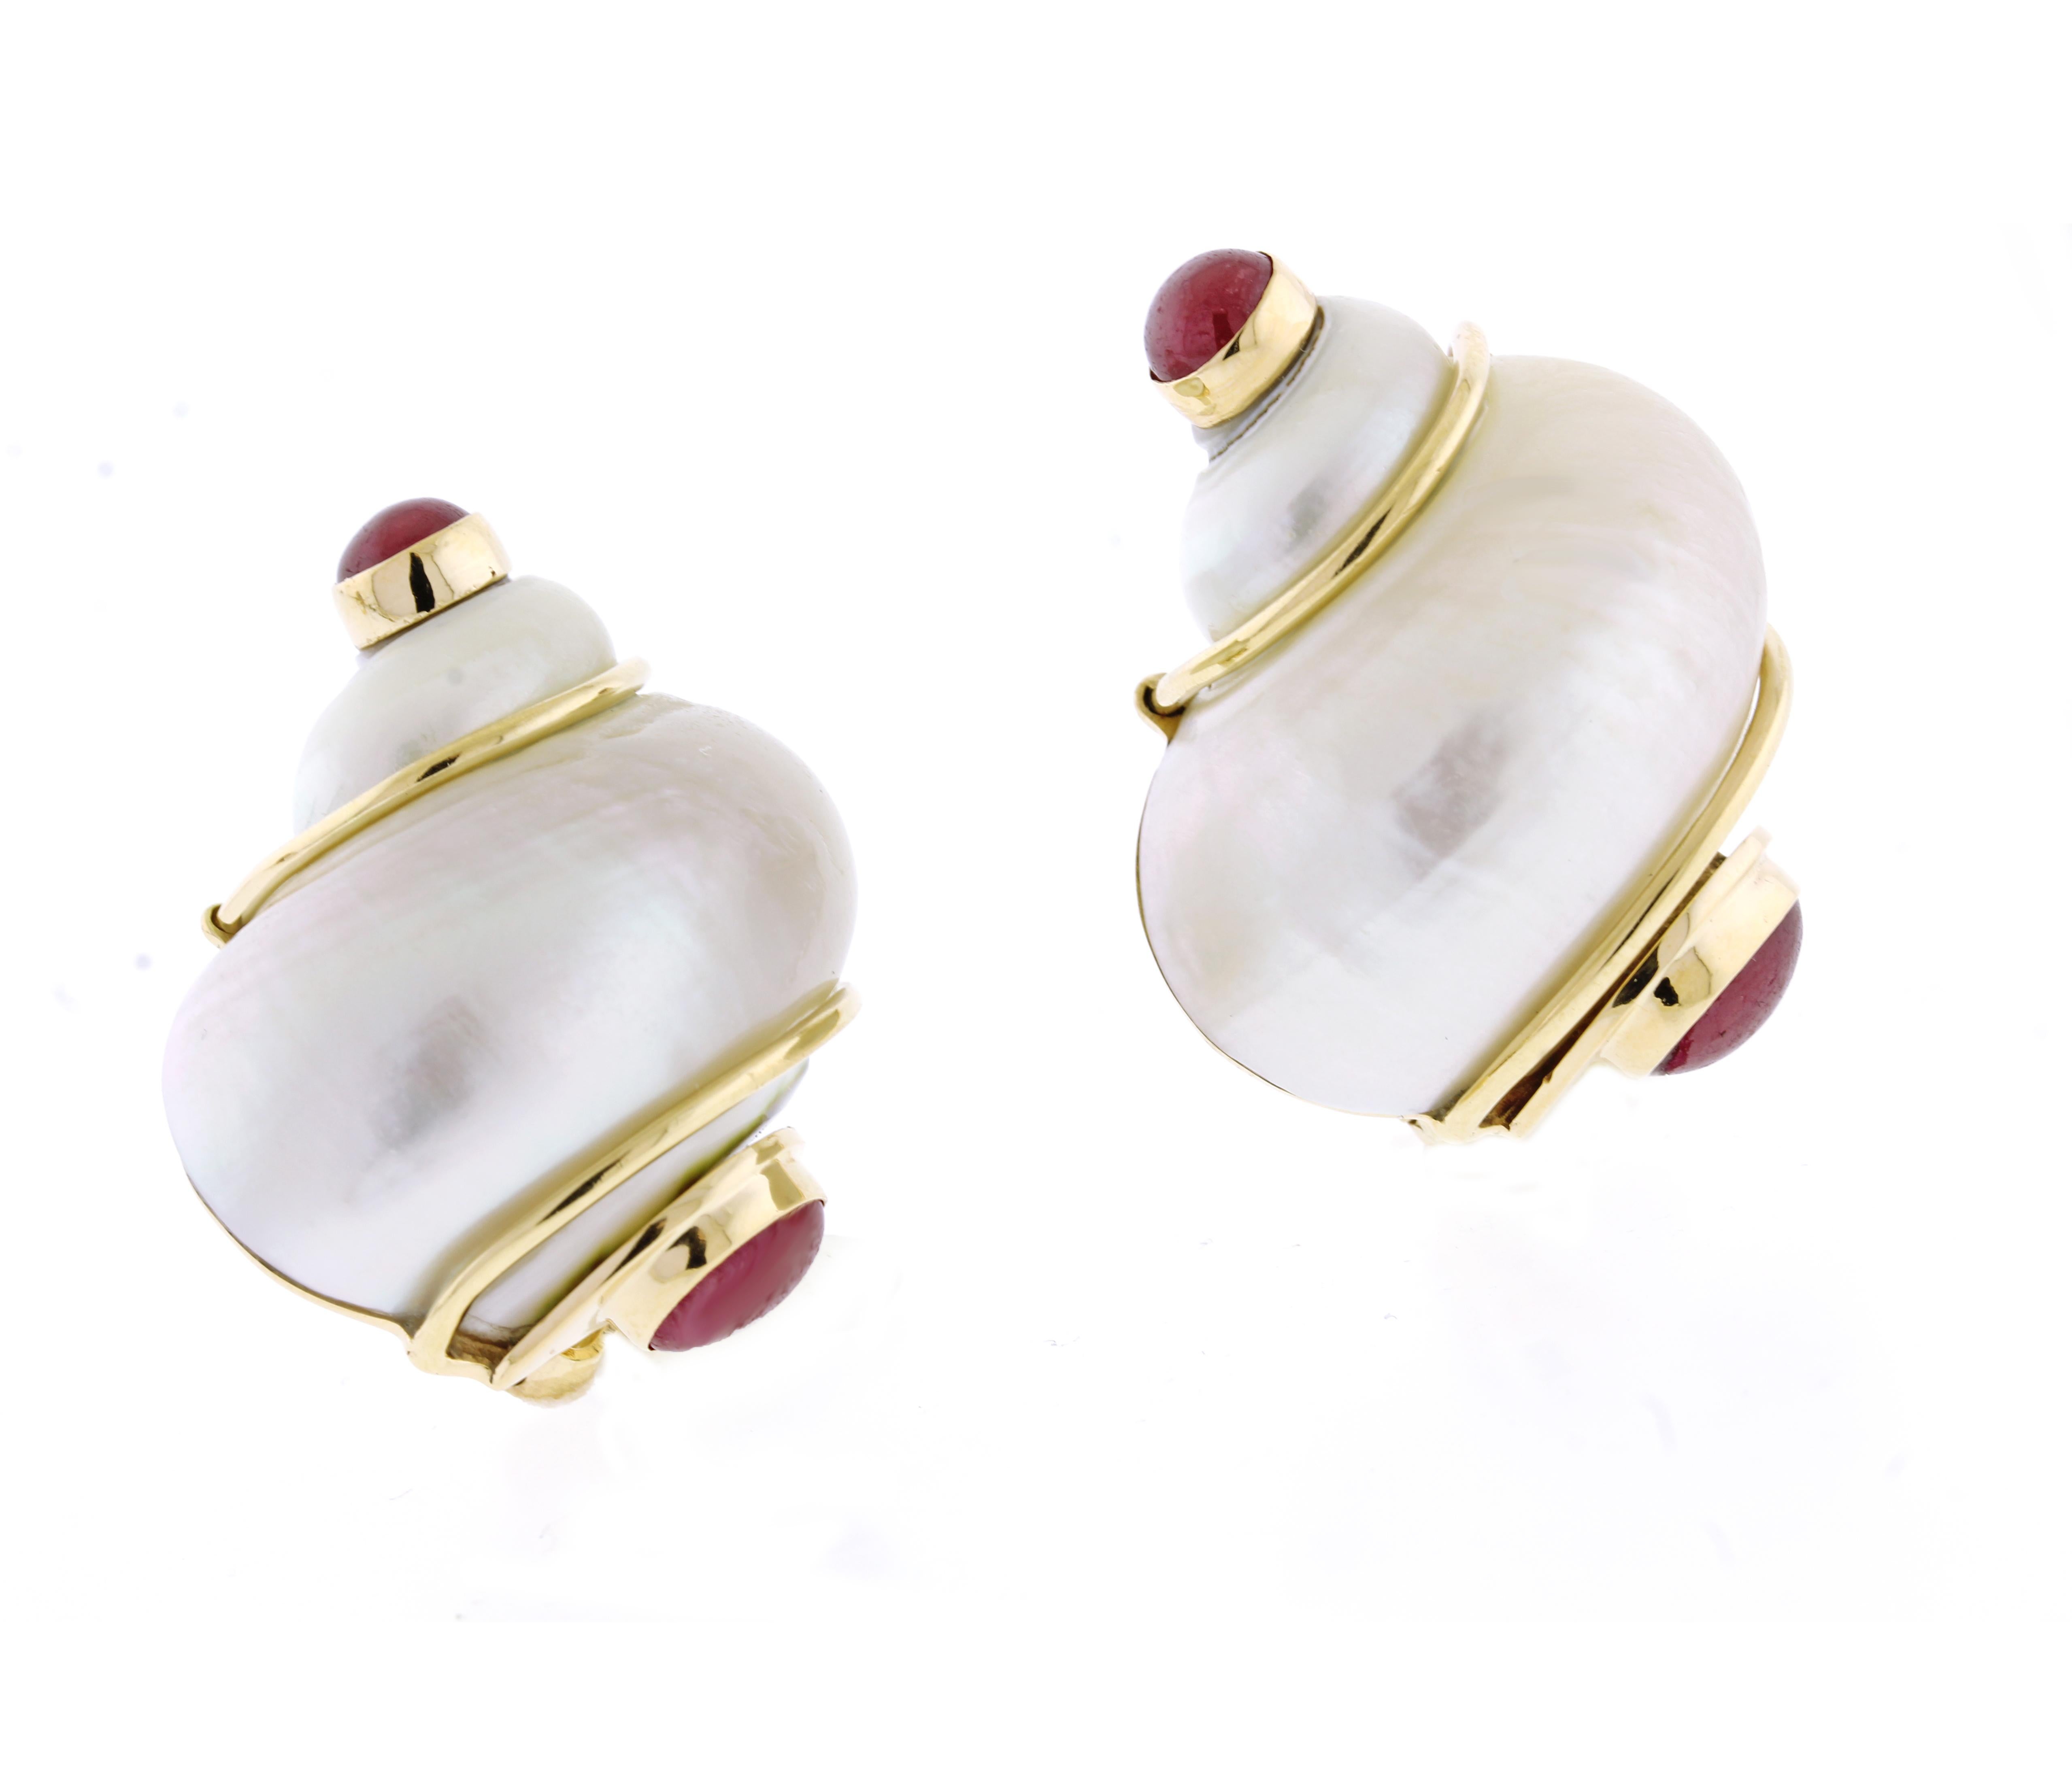 Classic turbo shell earclips from the 1960s by Seaman Schepps. The silvery-white shells with pink overtones are caressed in gleaming gold wire with a cabochon ruby terminal.  Signed 'P.S.V. of Seaman Shepps